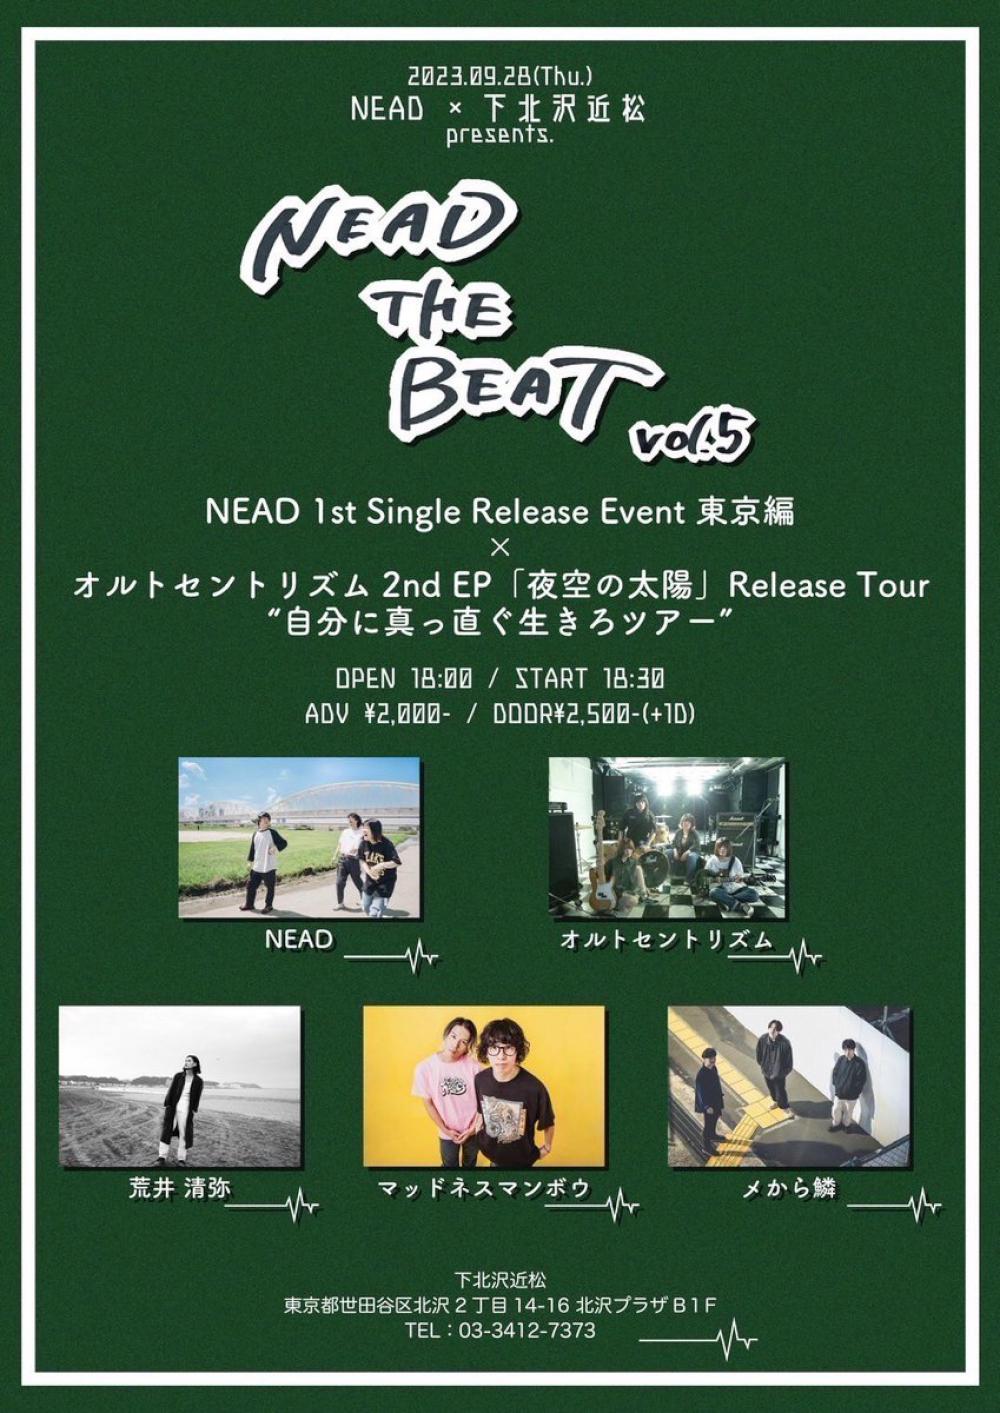 09/28 THU 『NEAD×下北沢近松 NEAD THE BEAT vol.5』NEAD 1st Single Release Event /  東京編 オルトセントリズム 2nd EP｢夜空の太陽｣Release Tour 自分に真っ直ぐ生きろツアー - 近松 (チカマツ)